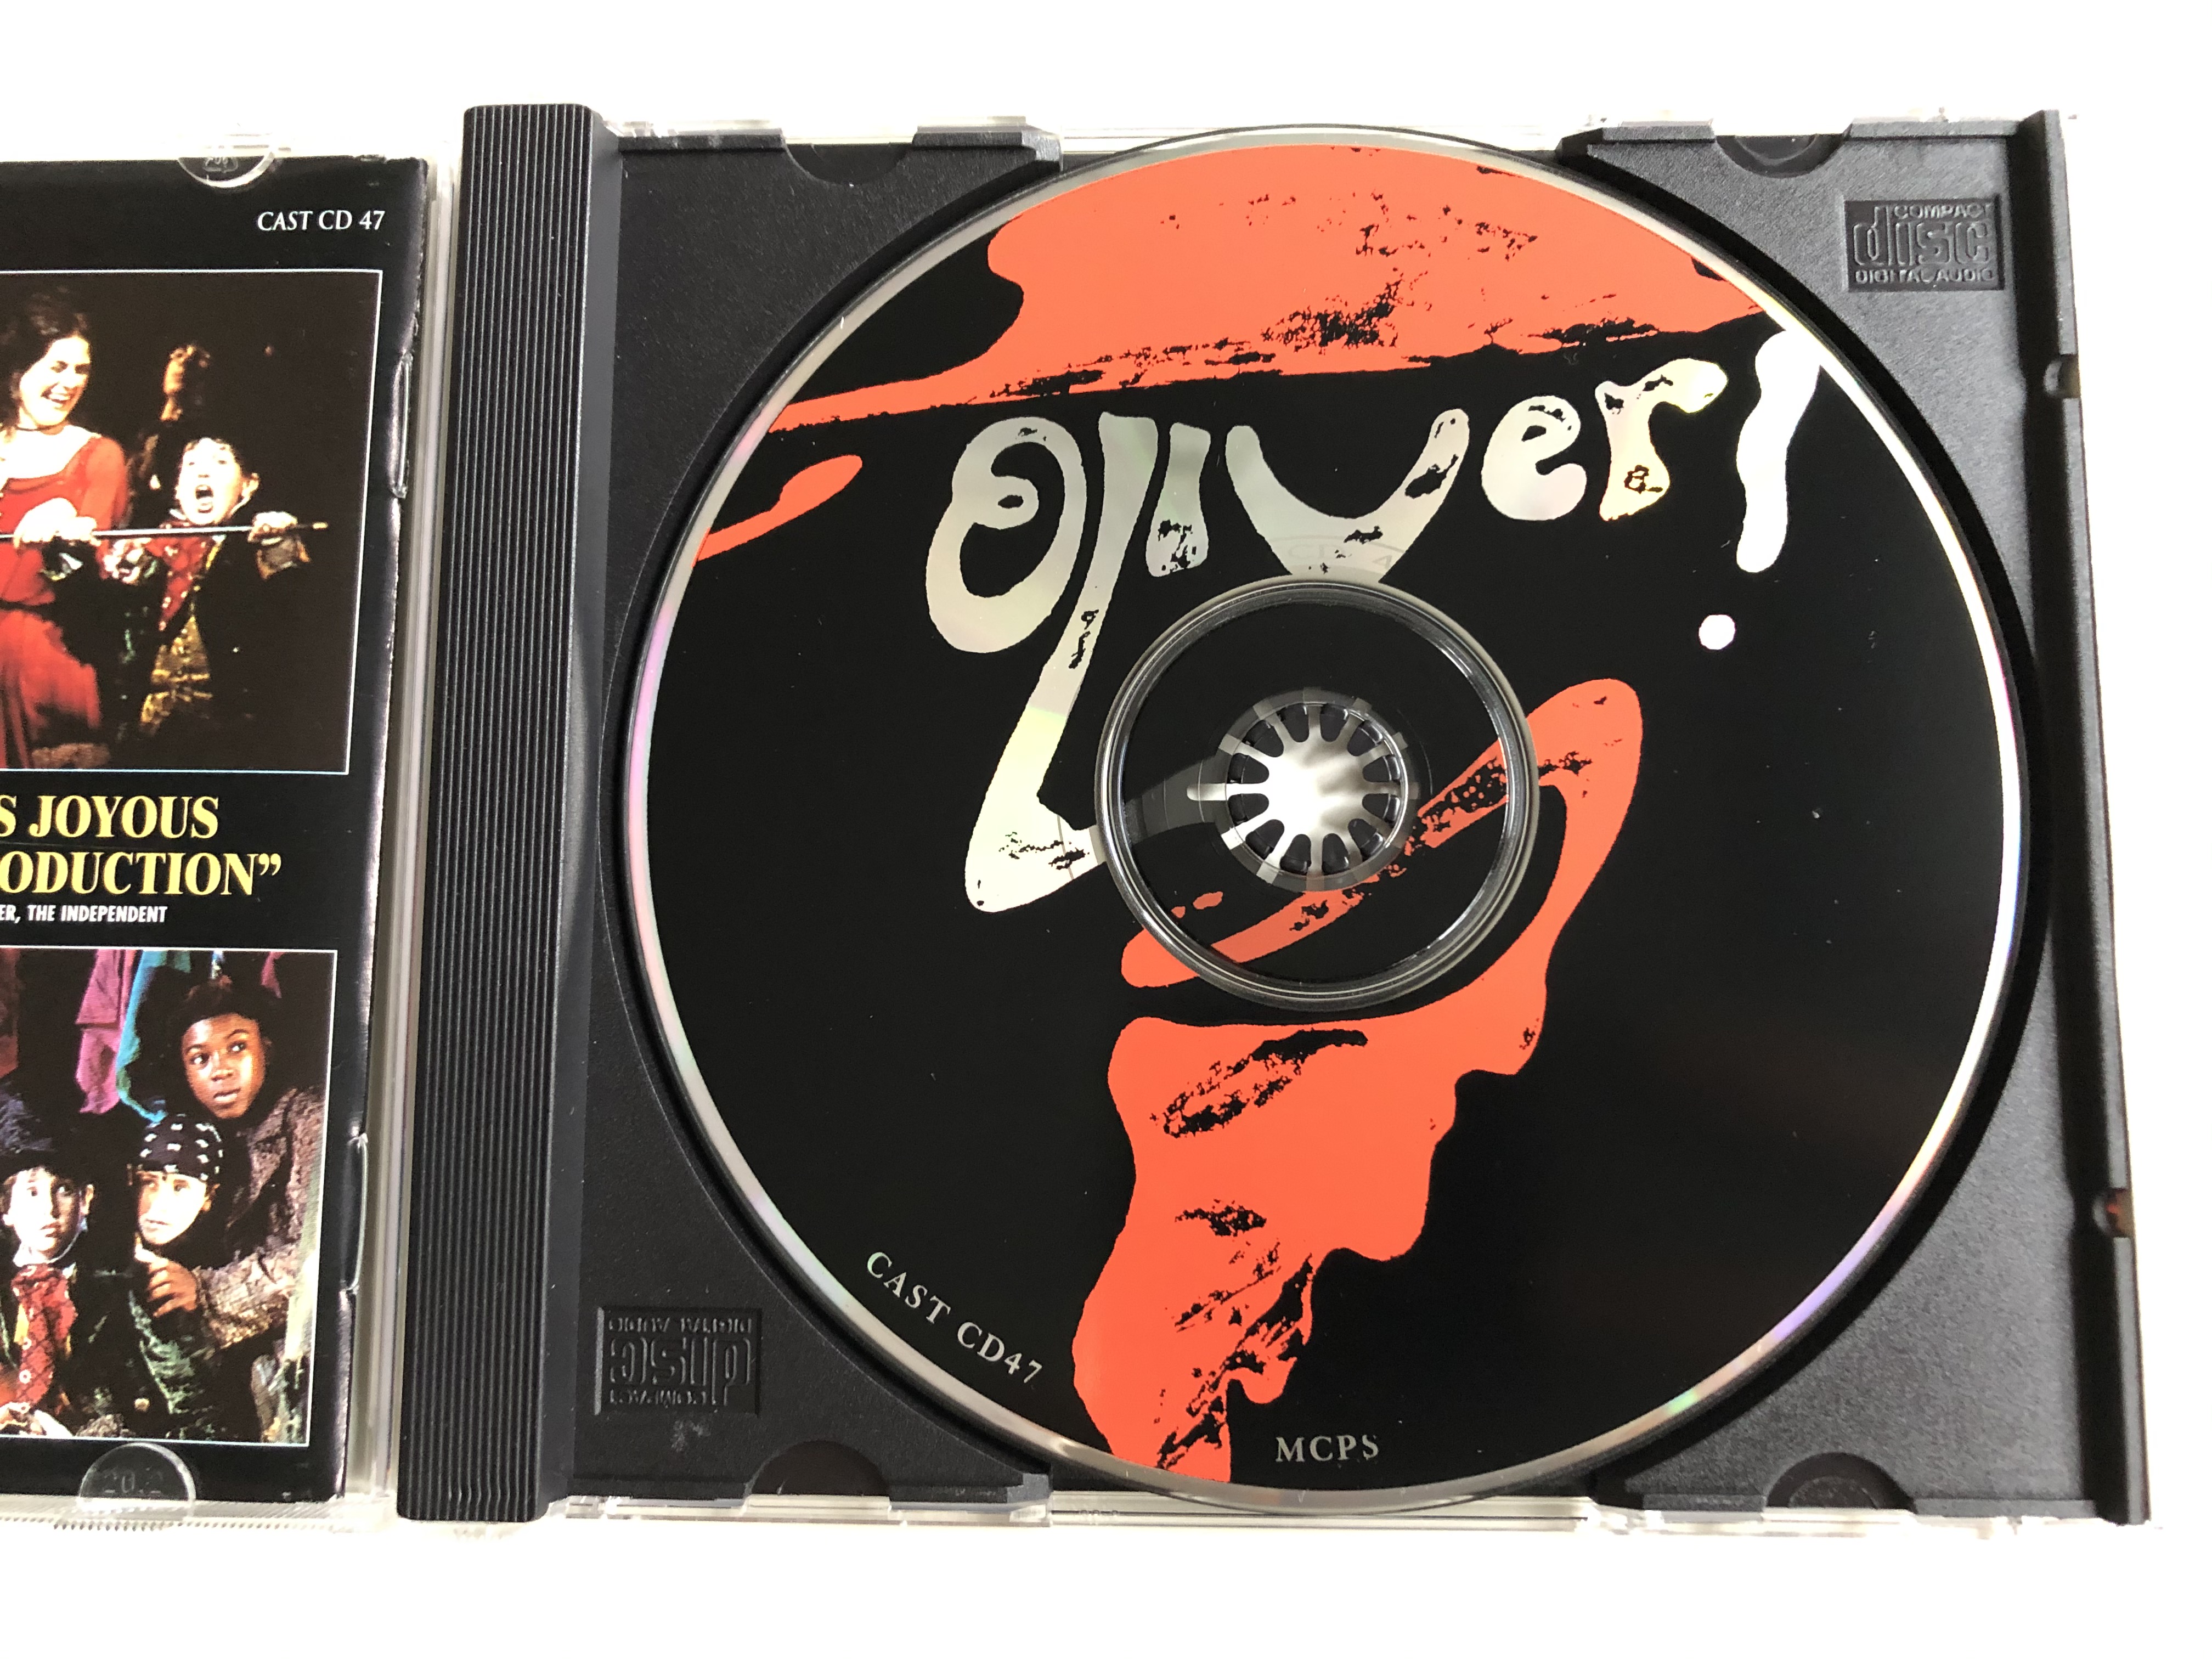 cameron-mackintosh-s-new-production-of-lionel-barts-musical-masterpiece-oliver-the-1994-london-palladium-cast-recording-first-night-records-audio-cd-1995-cast-cd-47-7-.jpg